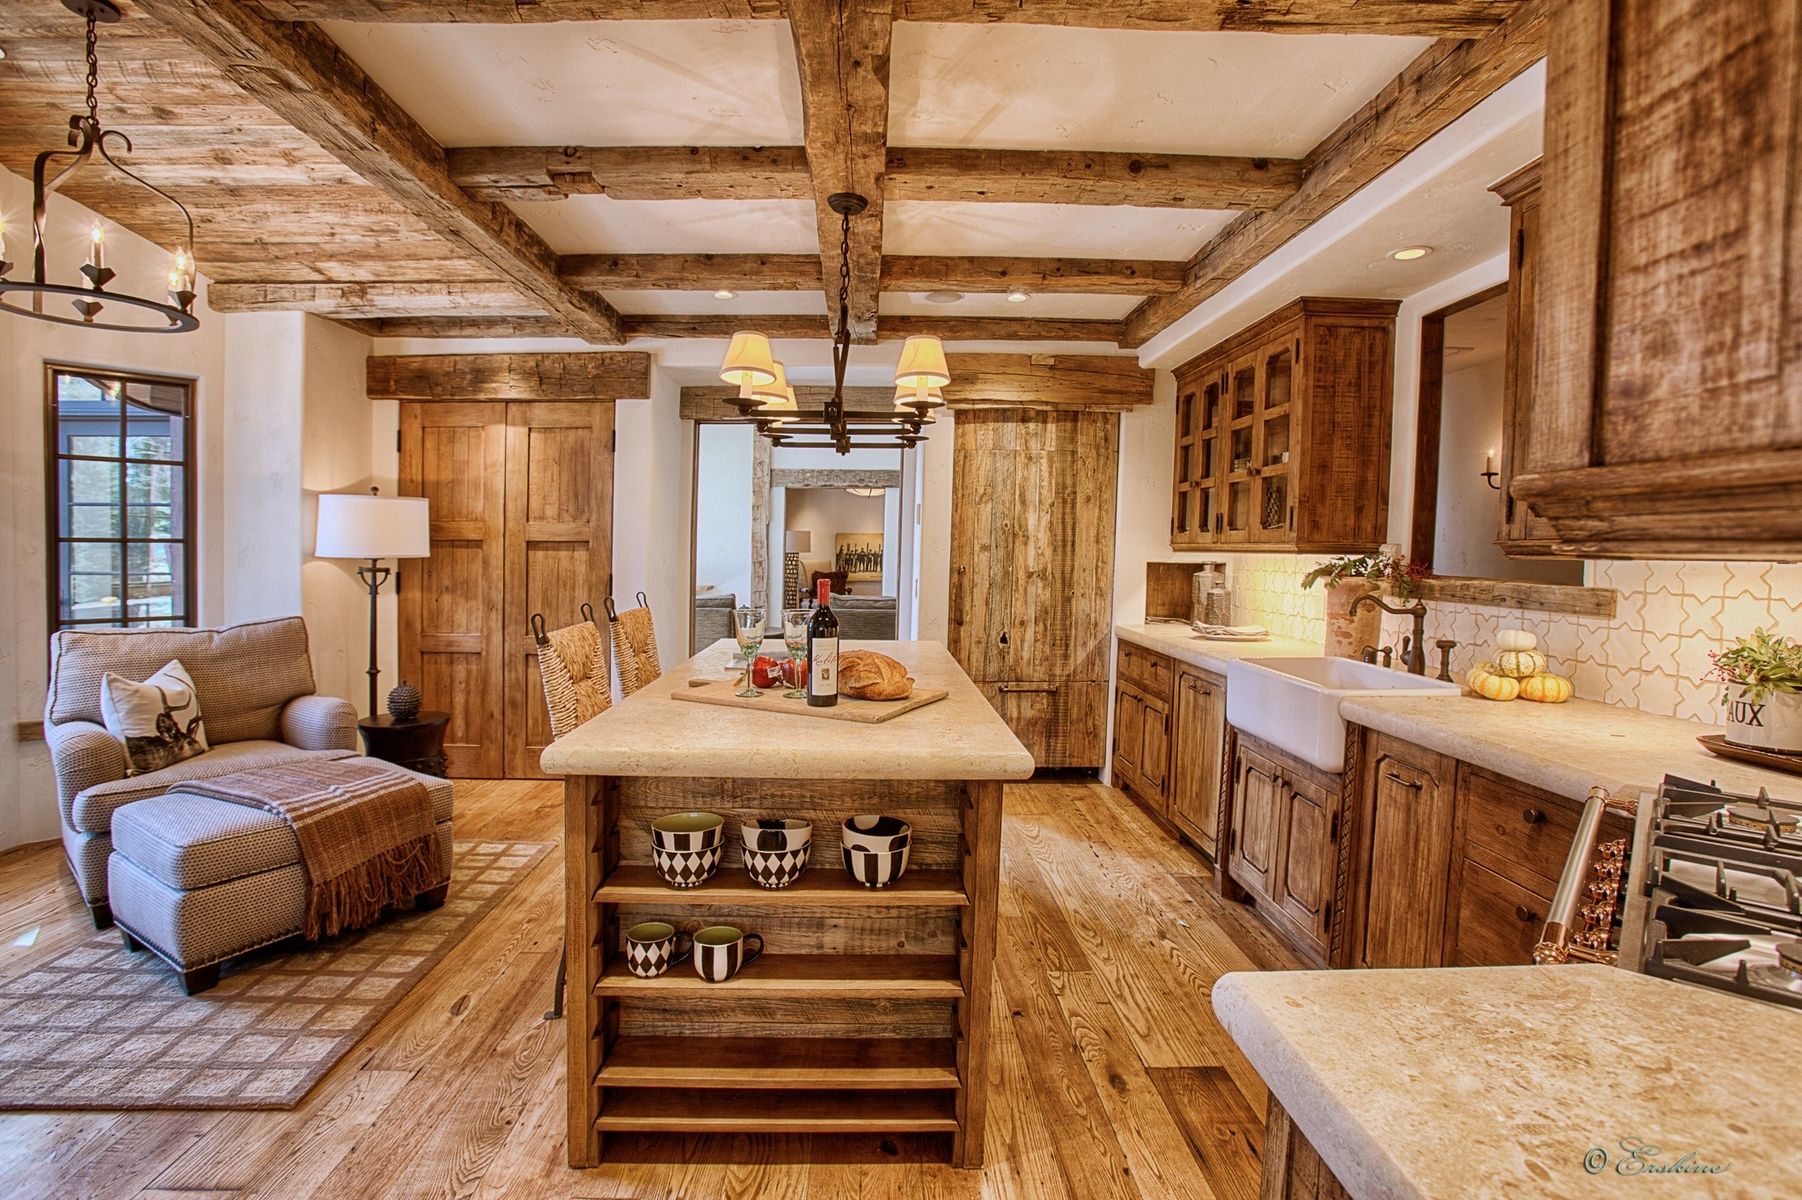 Adding wood beams to your ceiling provides a lot of warps for your kitchen. When you're remodeling your kitchen it might be a good idea to add island countertop with seating to help maximize space.